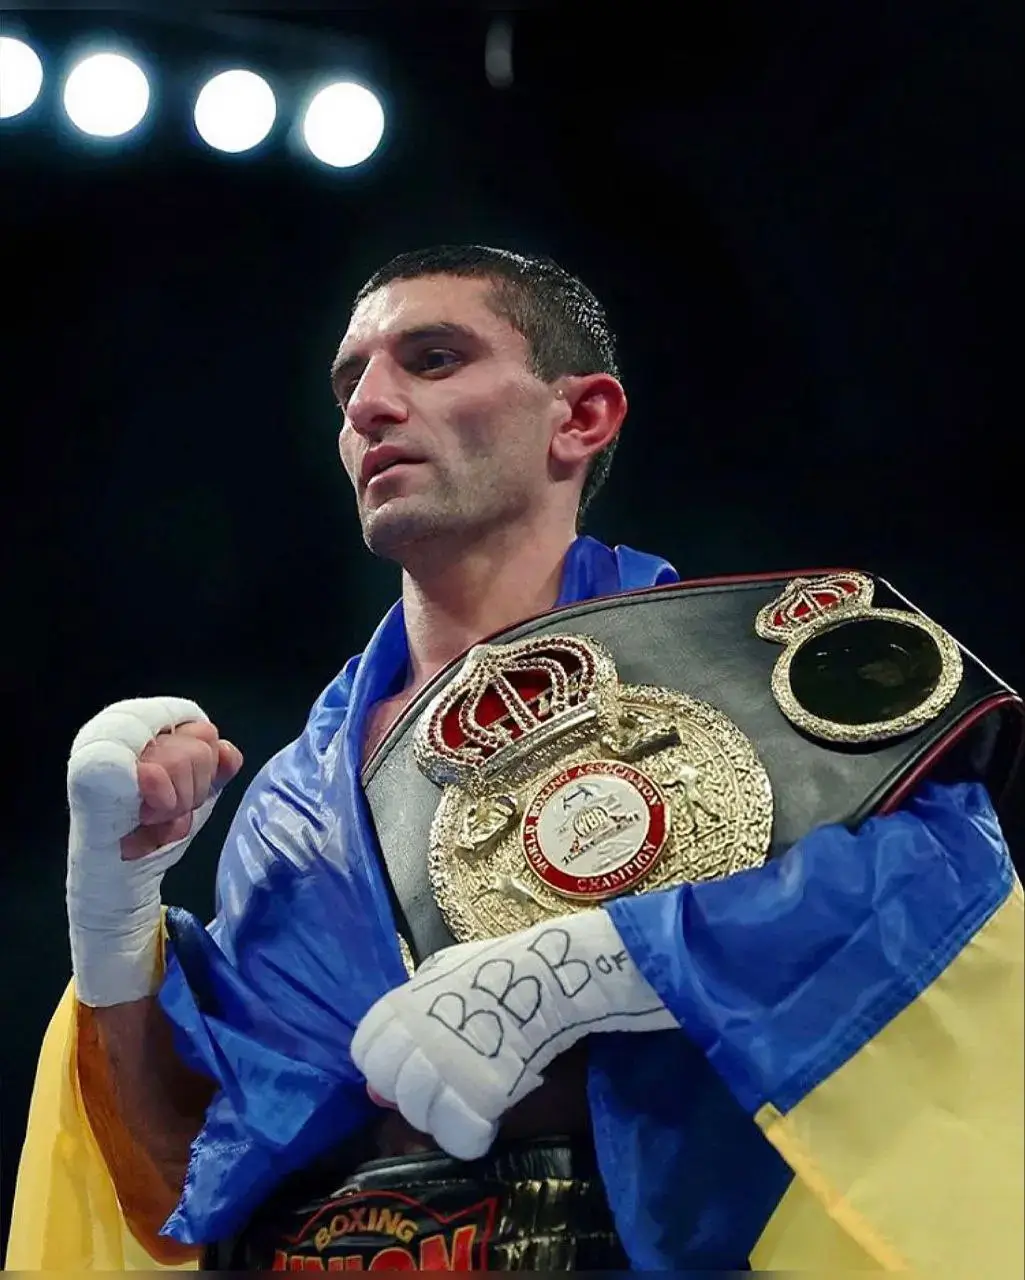 Artem Dalakian, who defended the title of world champion and dedicated his victory to Ukraine. He started his sports career in the “Golden Glove” club of Soledar